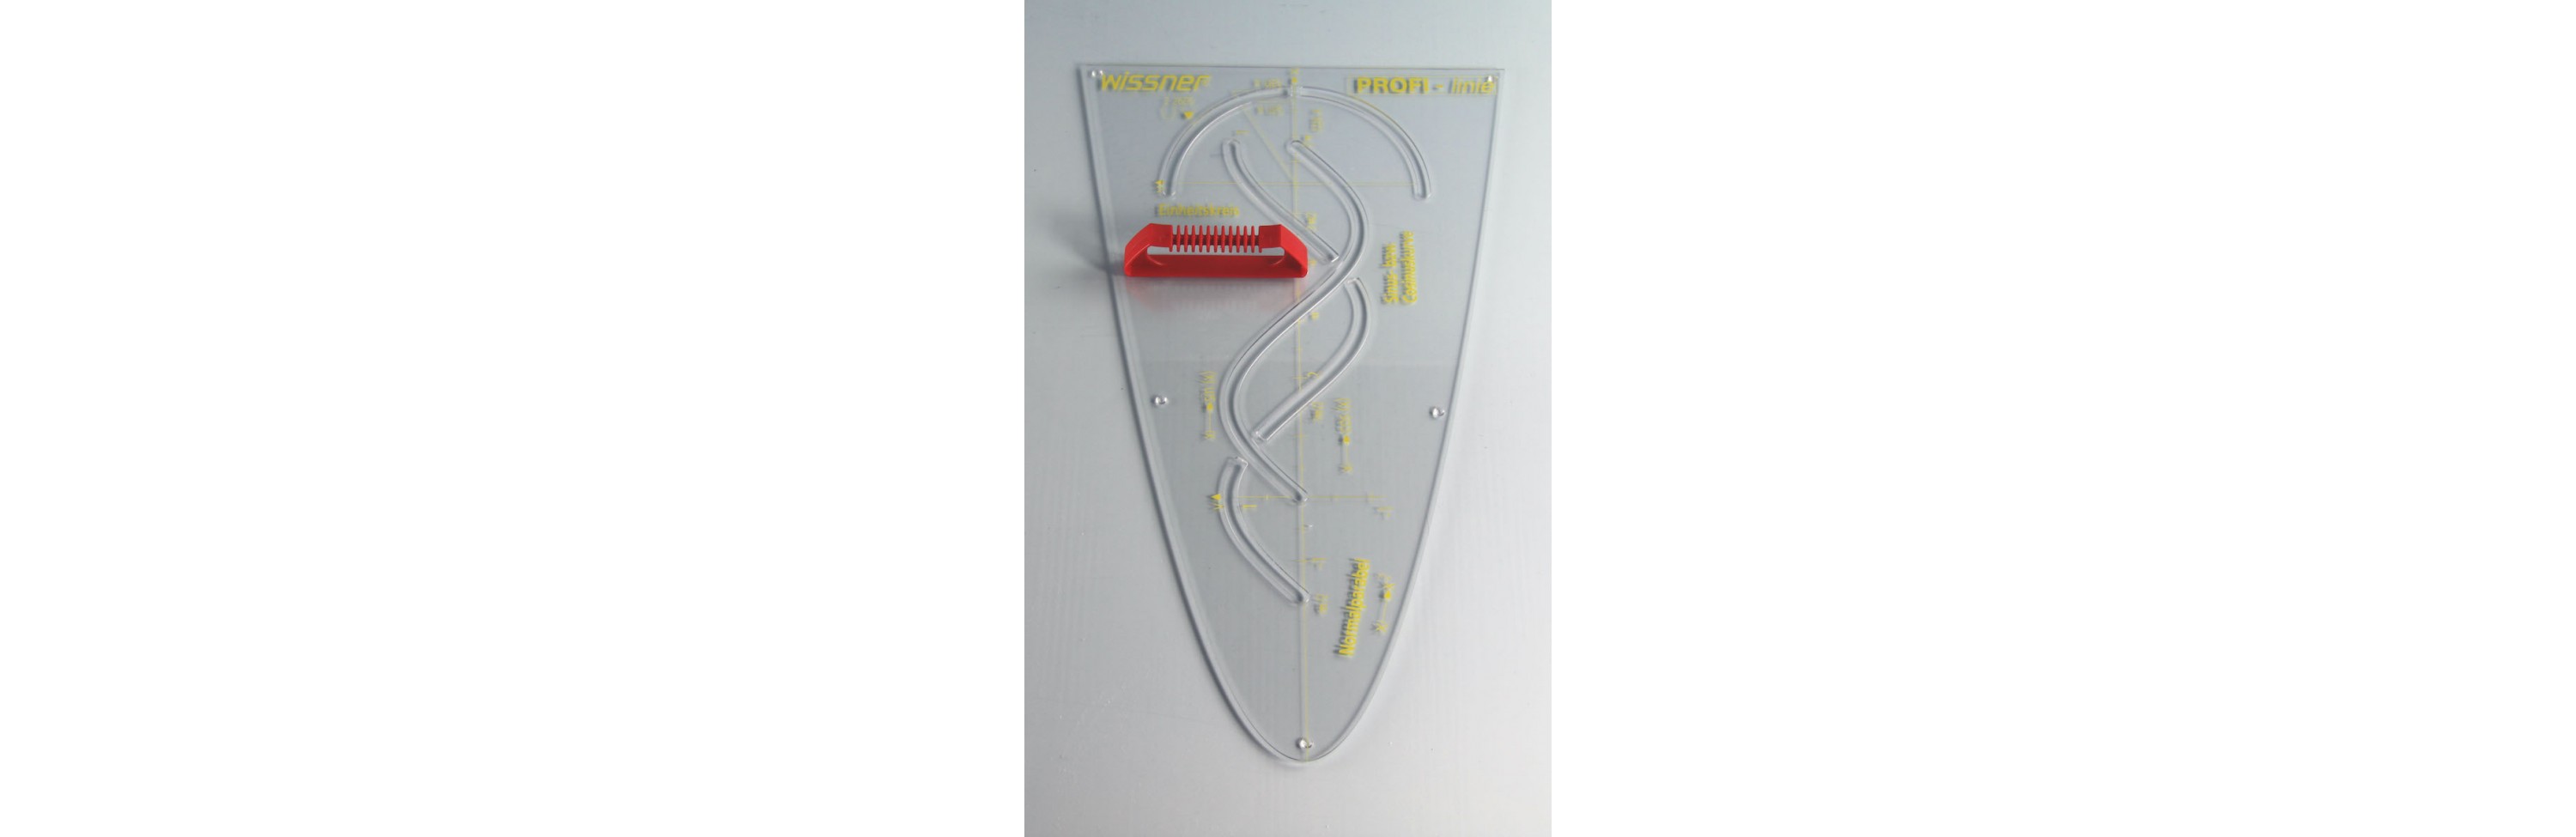 Wissner® active learning - Parabola Template 50cm PROFI-linie